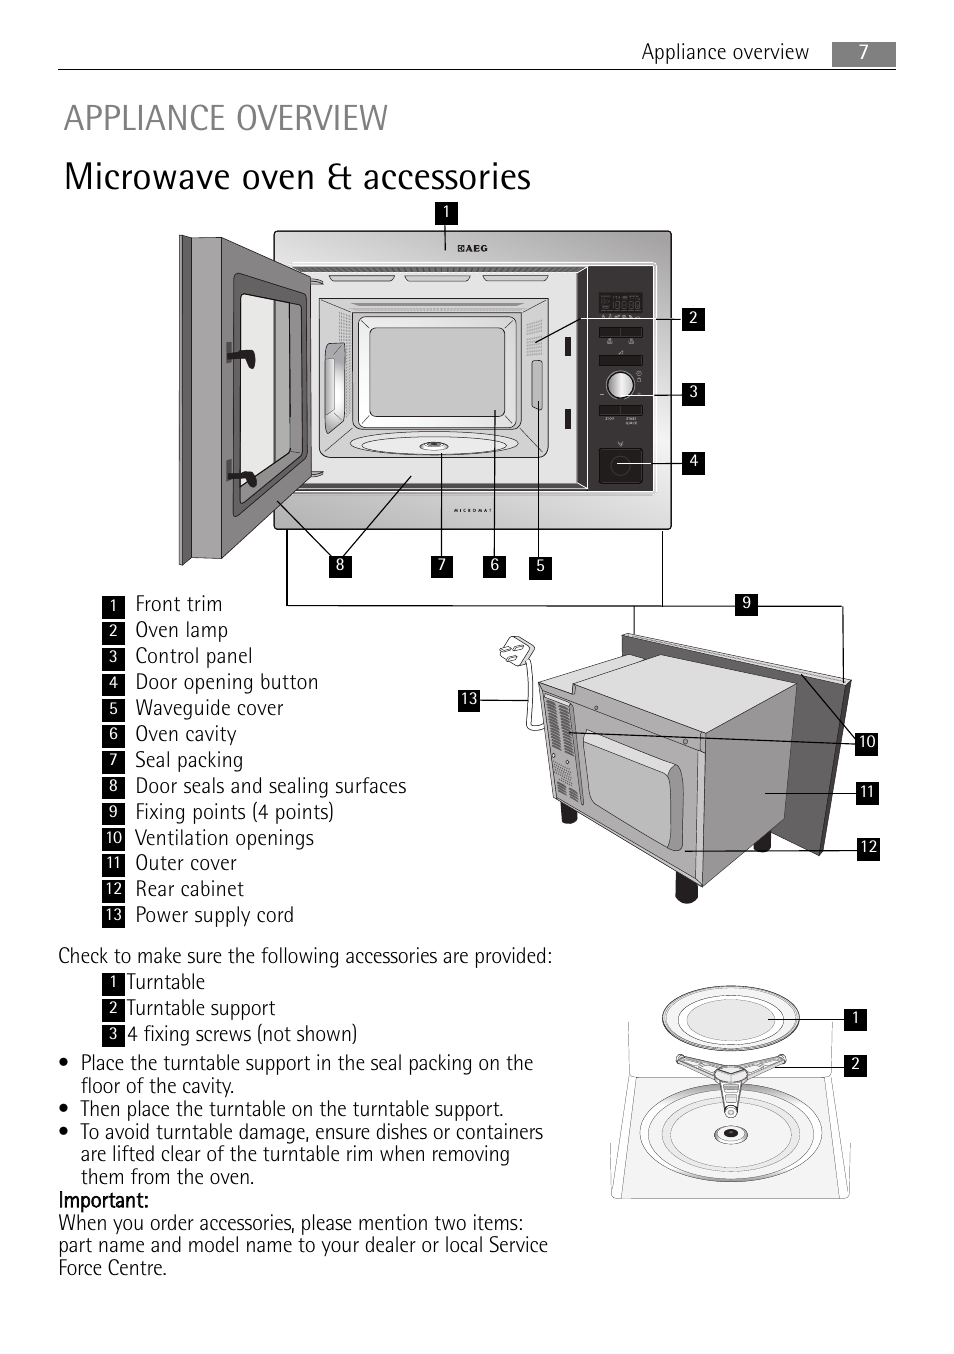 Microwave oven & accessories, Appliance overview | AEG MC2664E-W User Manual | Page 7 / 36